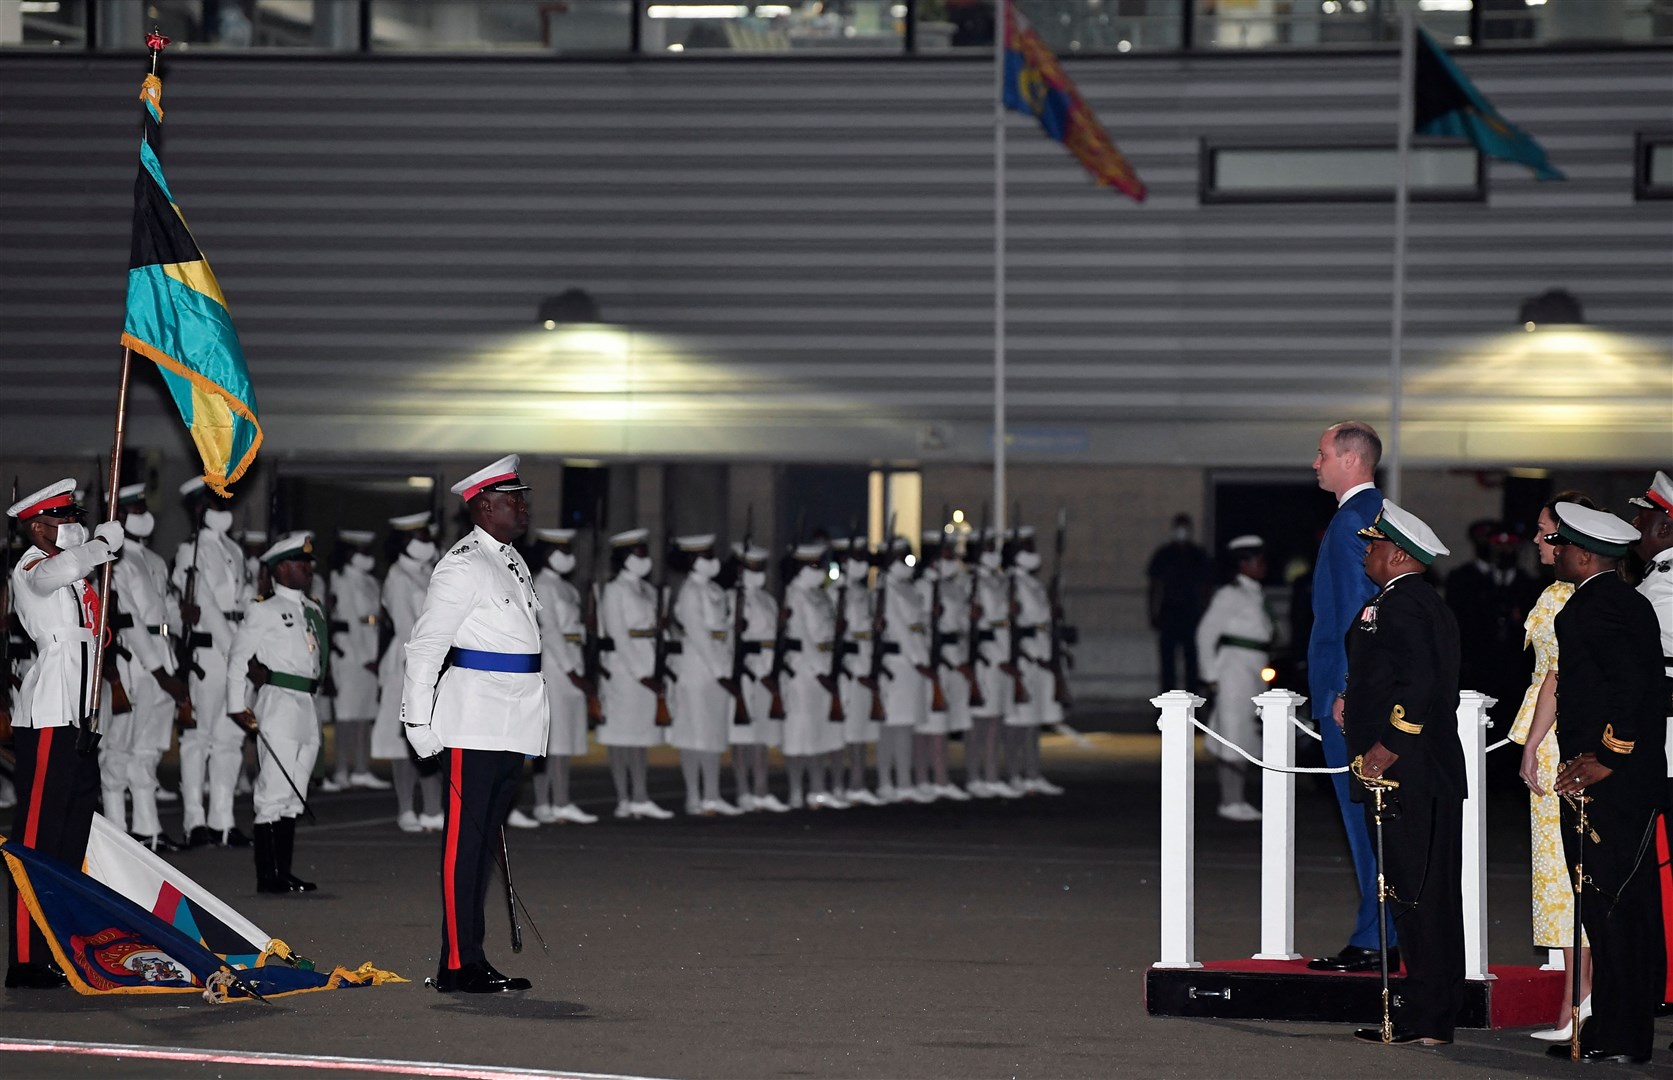 The then Duke of Cambridge observes a guard of honour during a departure ceremony at Lynden Pindling International Airport in the Bahamas in March (Toby Melville/PA)